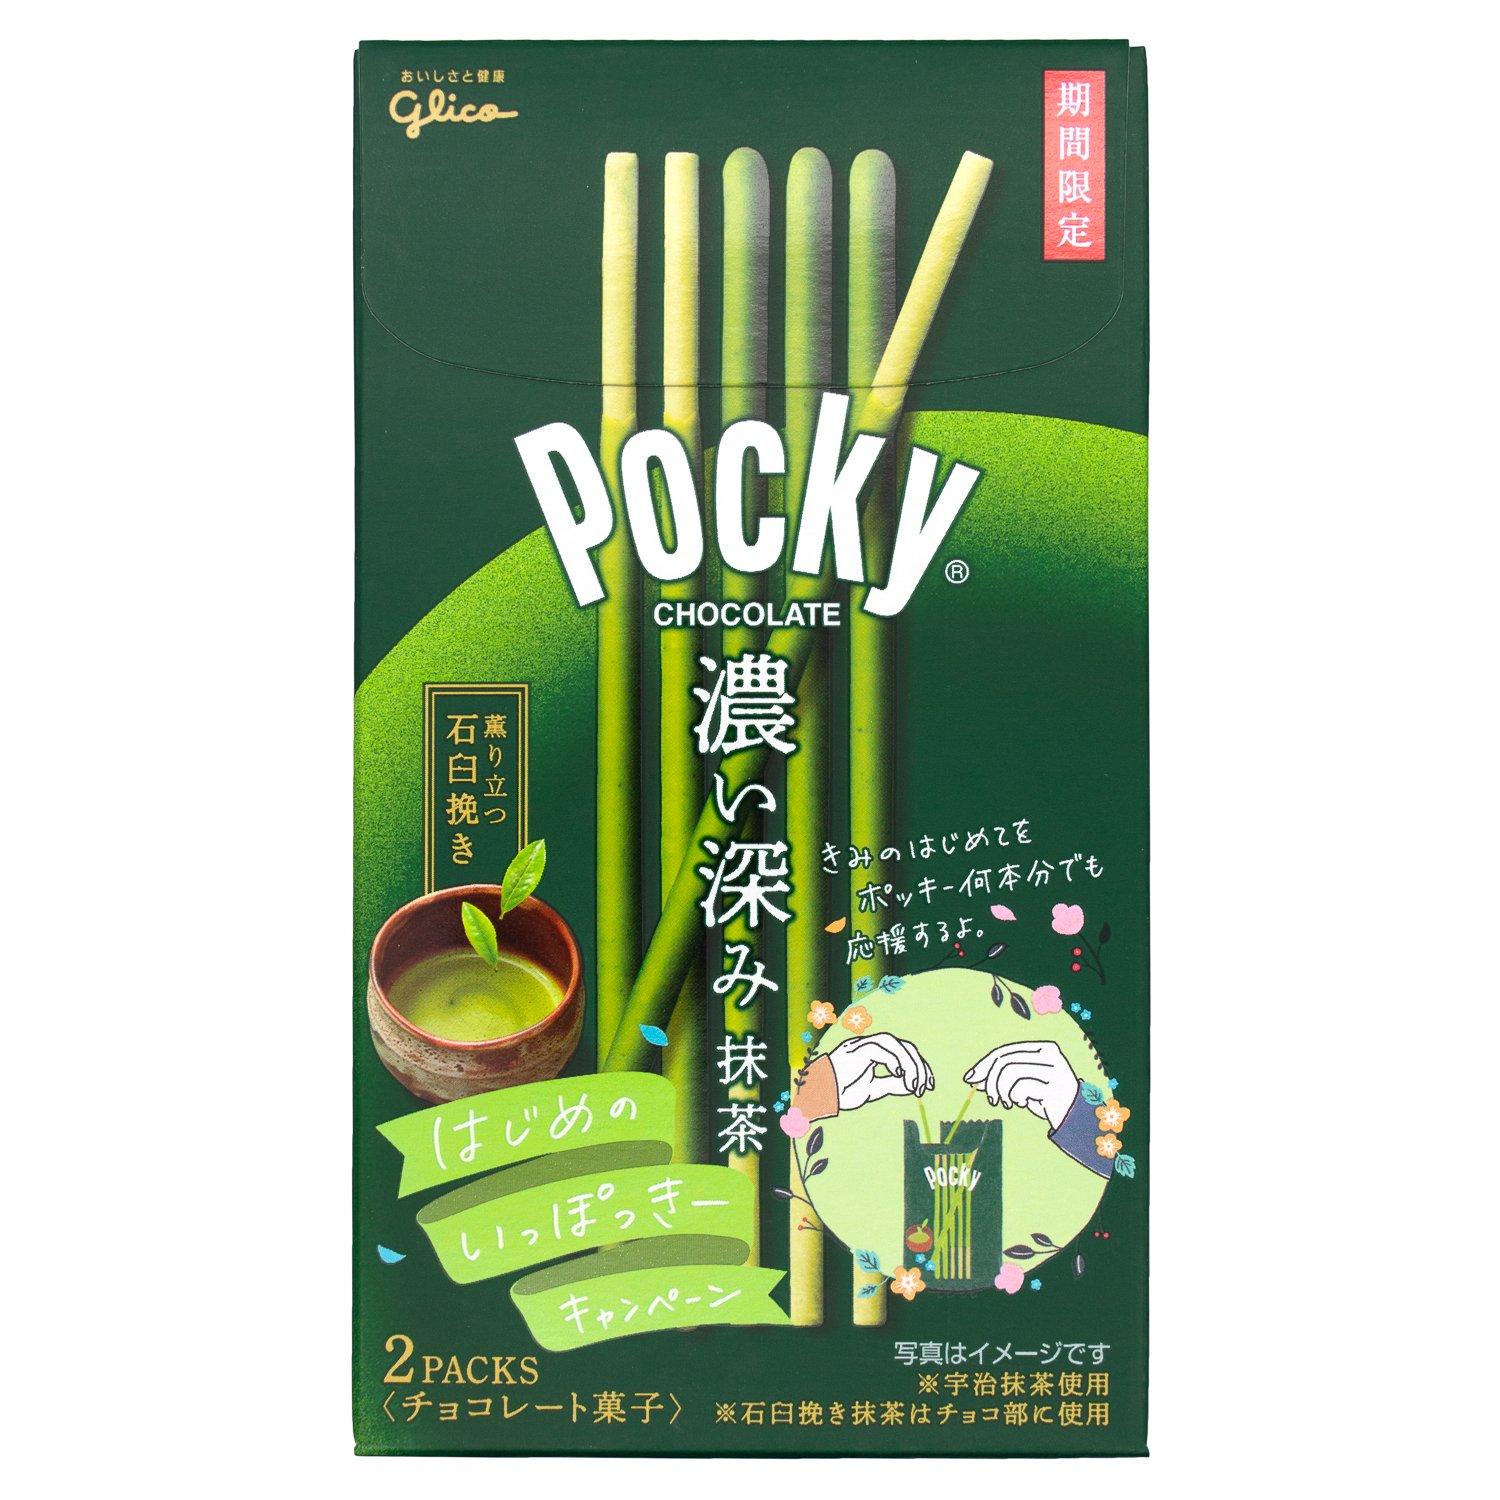 Pocky Cream Covered Biscuit Sticks Meltable Glico Double Matcha 2.05 Ounce 